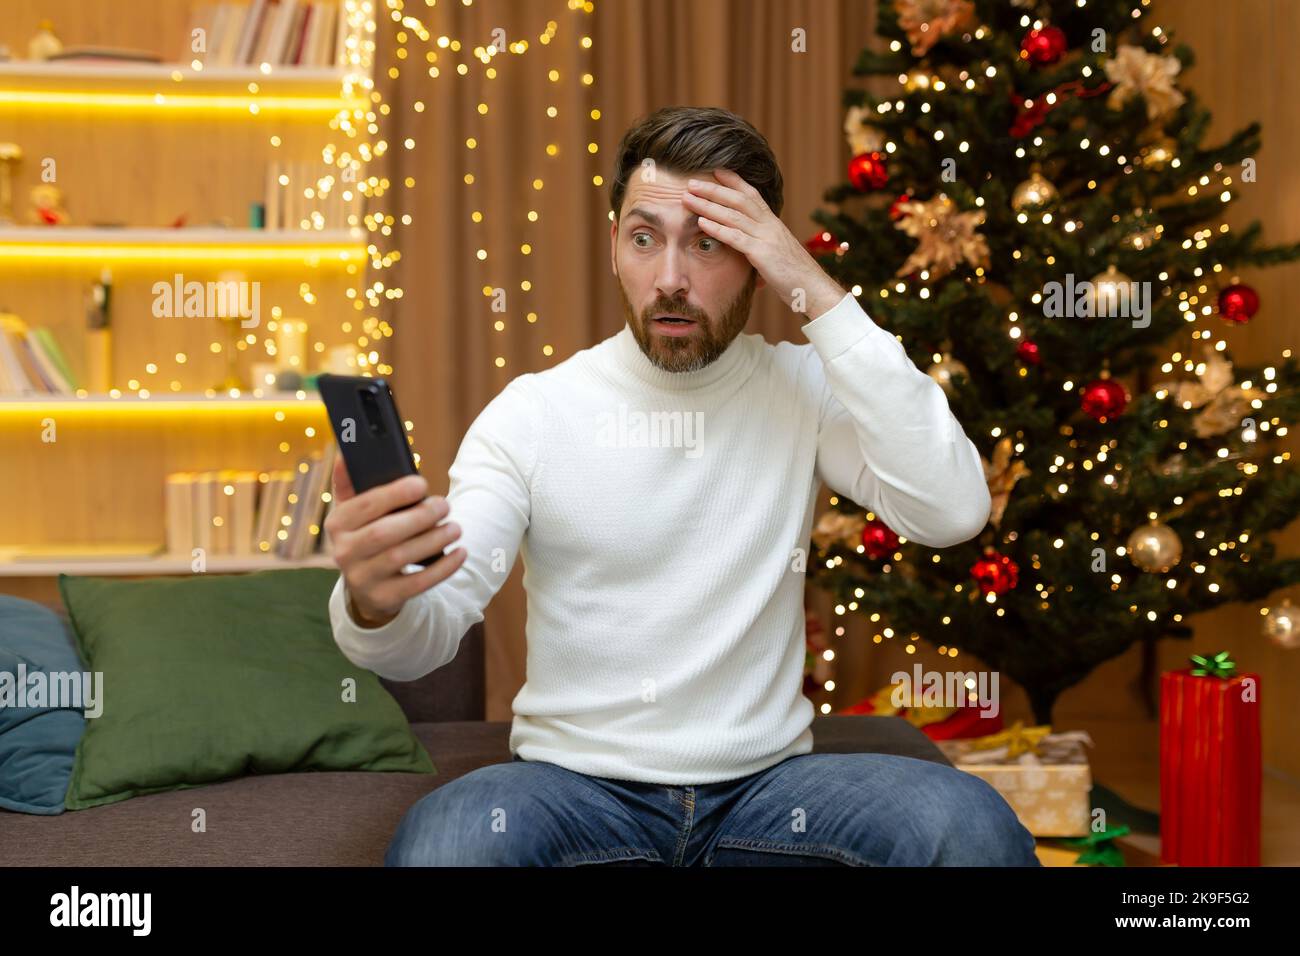 Upset and disappointed christmas man reading online messages and notifications from smartphone, sitting at home on christmas sofa during new year holidays. Stock Photo